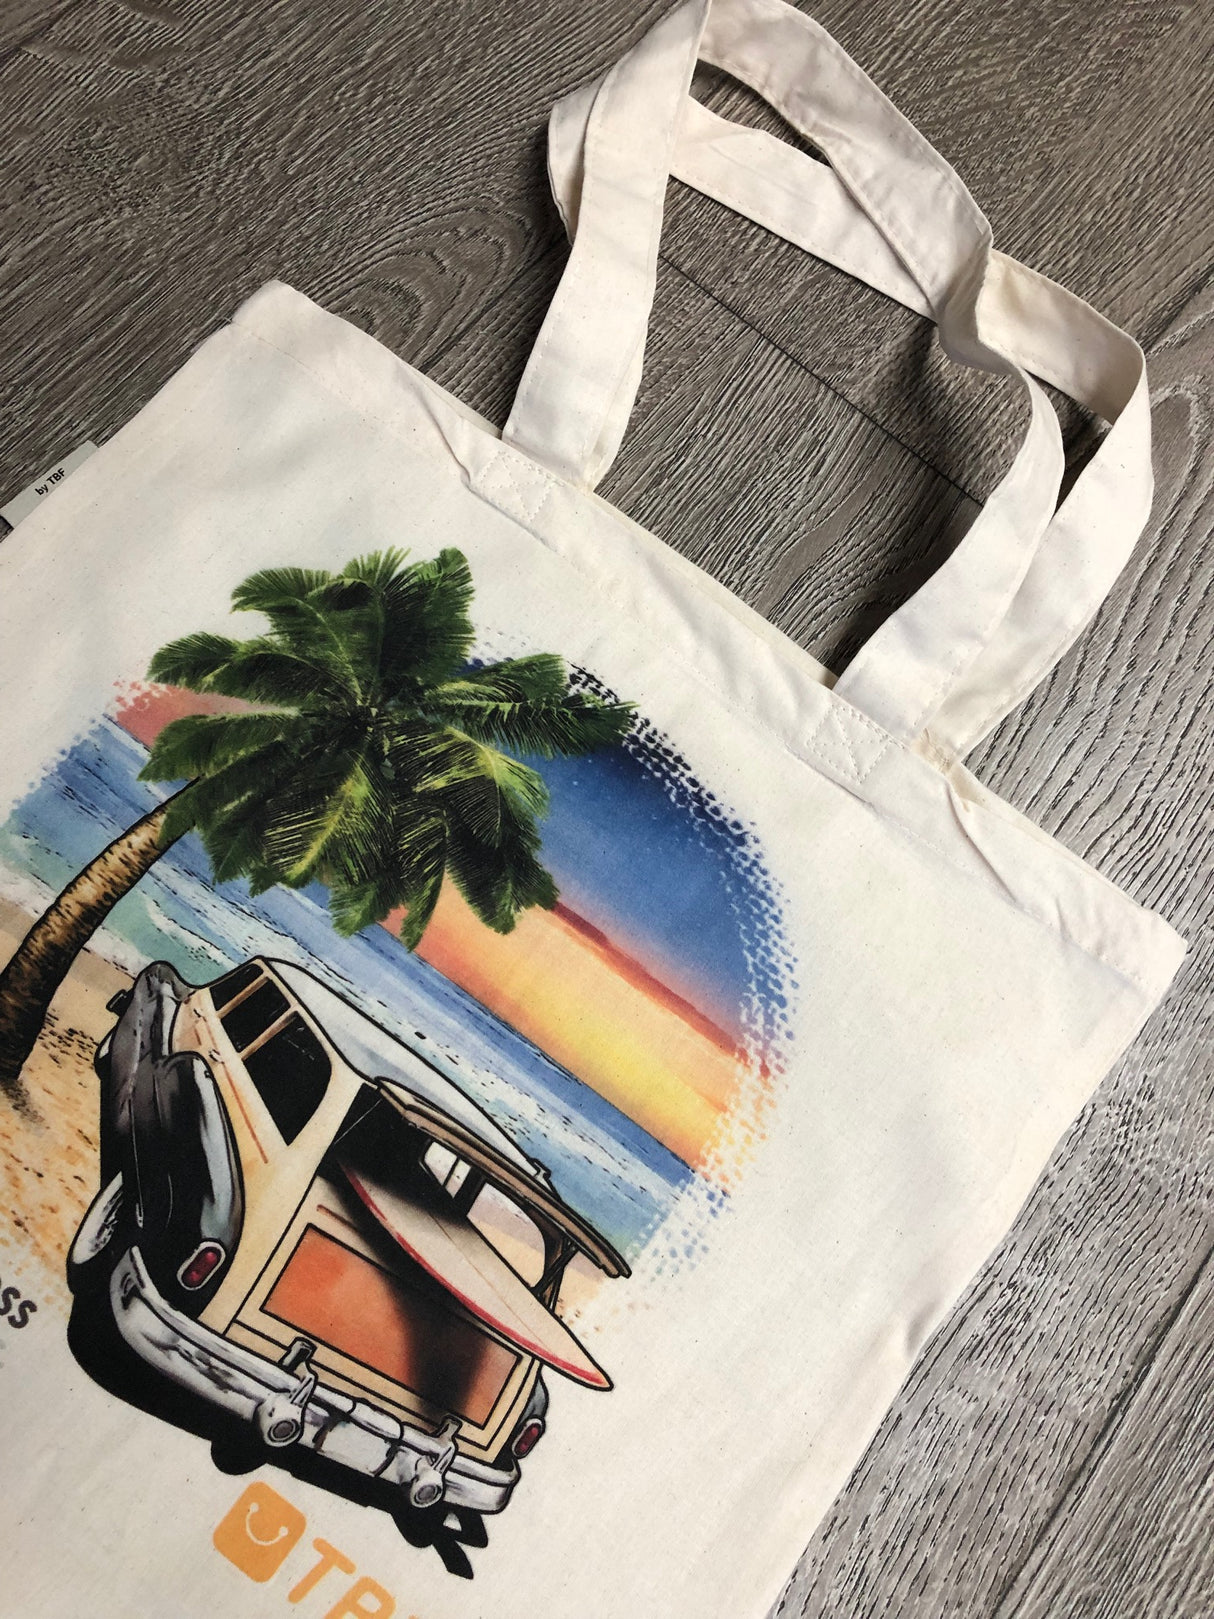 Photo on canvas bags